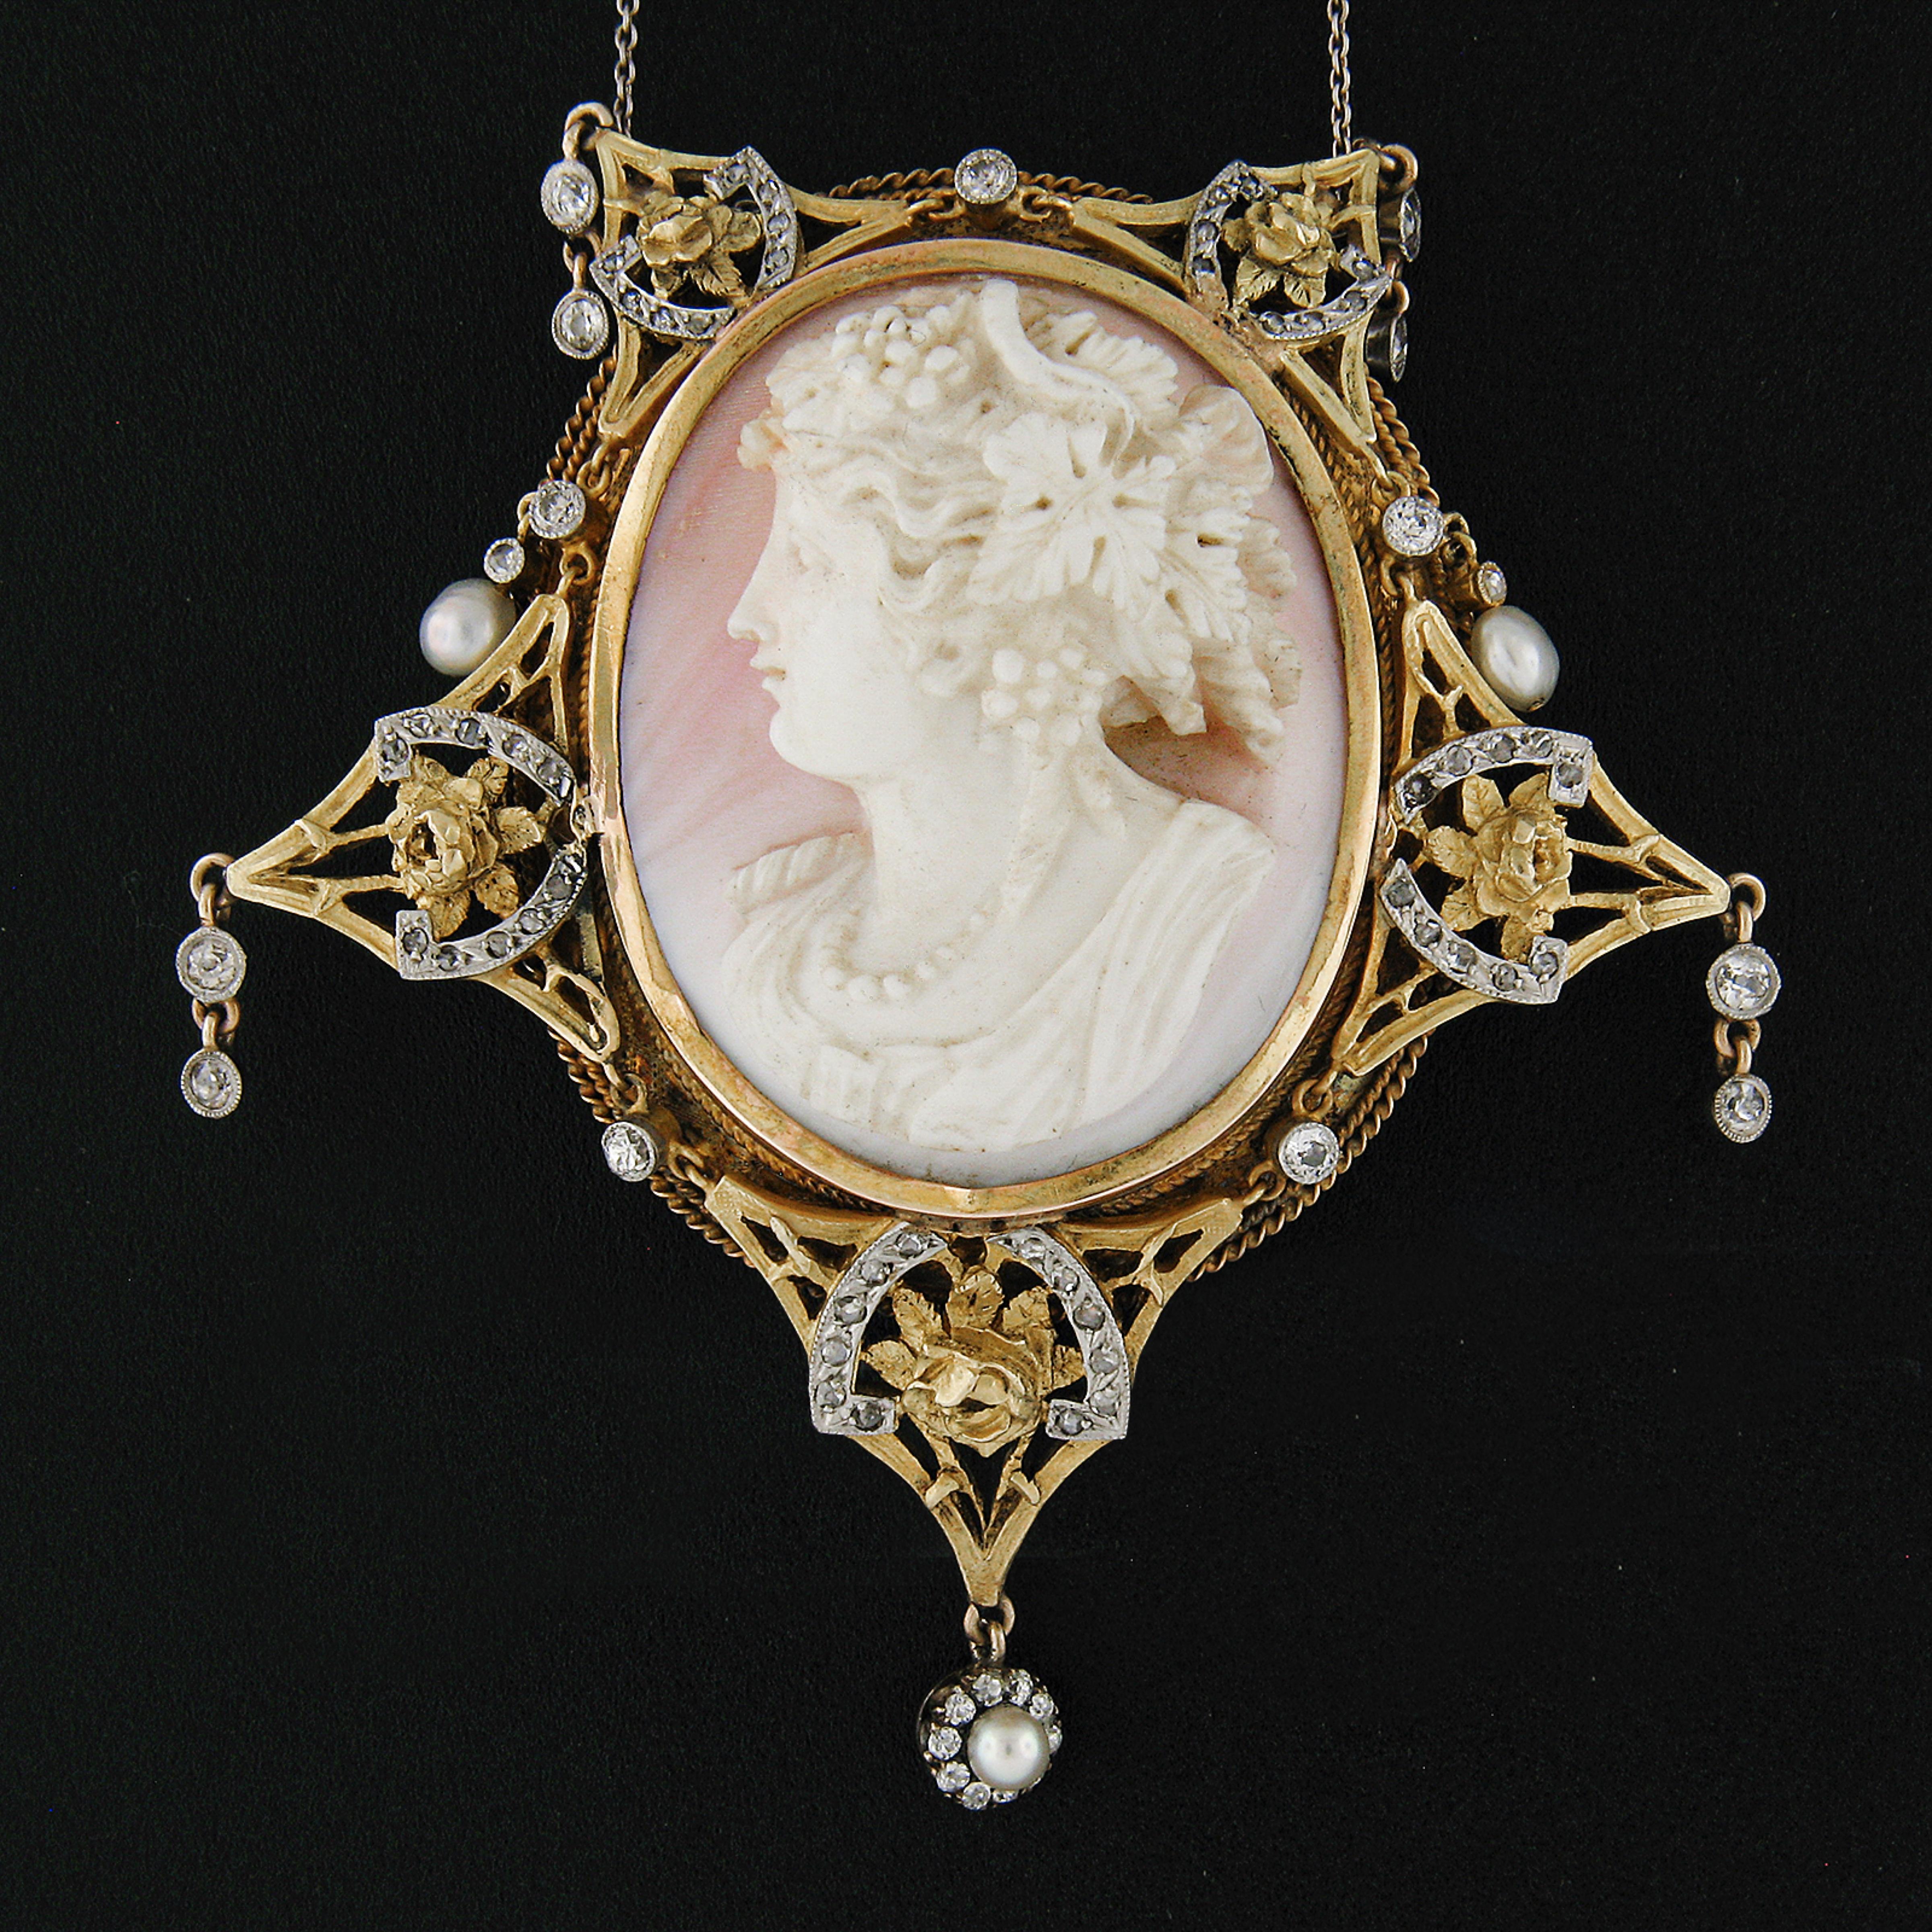 This magnificent antique brooch was crafted from solid 18k yellow gold during the Victorian era. It features a VERY DETAILED, oval shaped, high relief cameo carved from a natural white and pink shell that was then bezel set at its center. The cameo